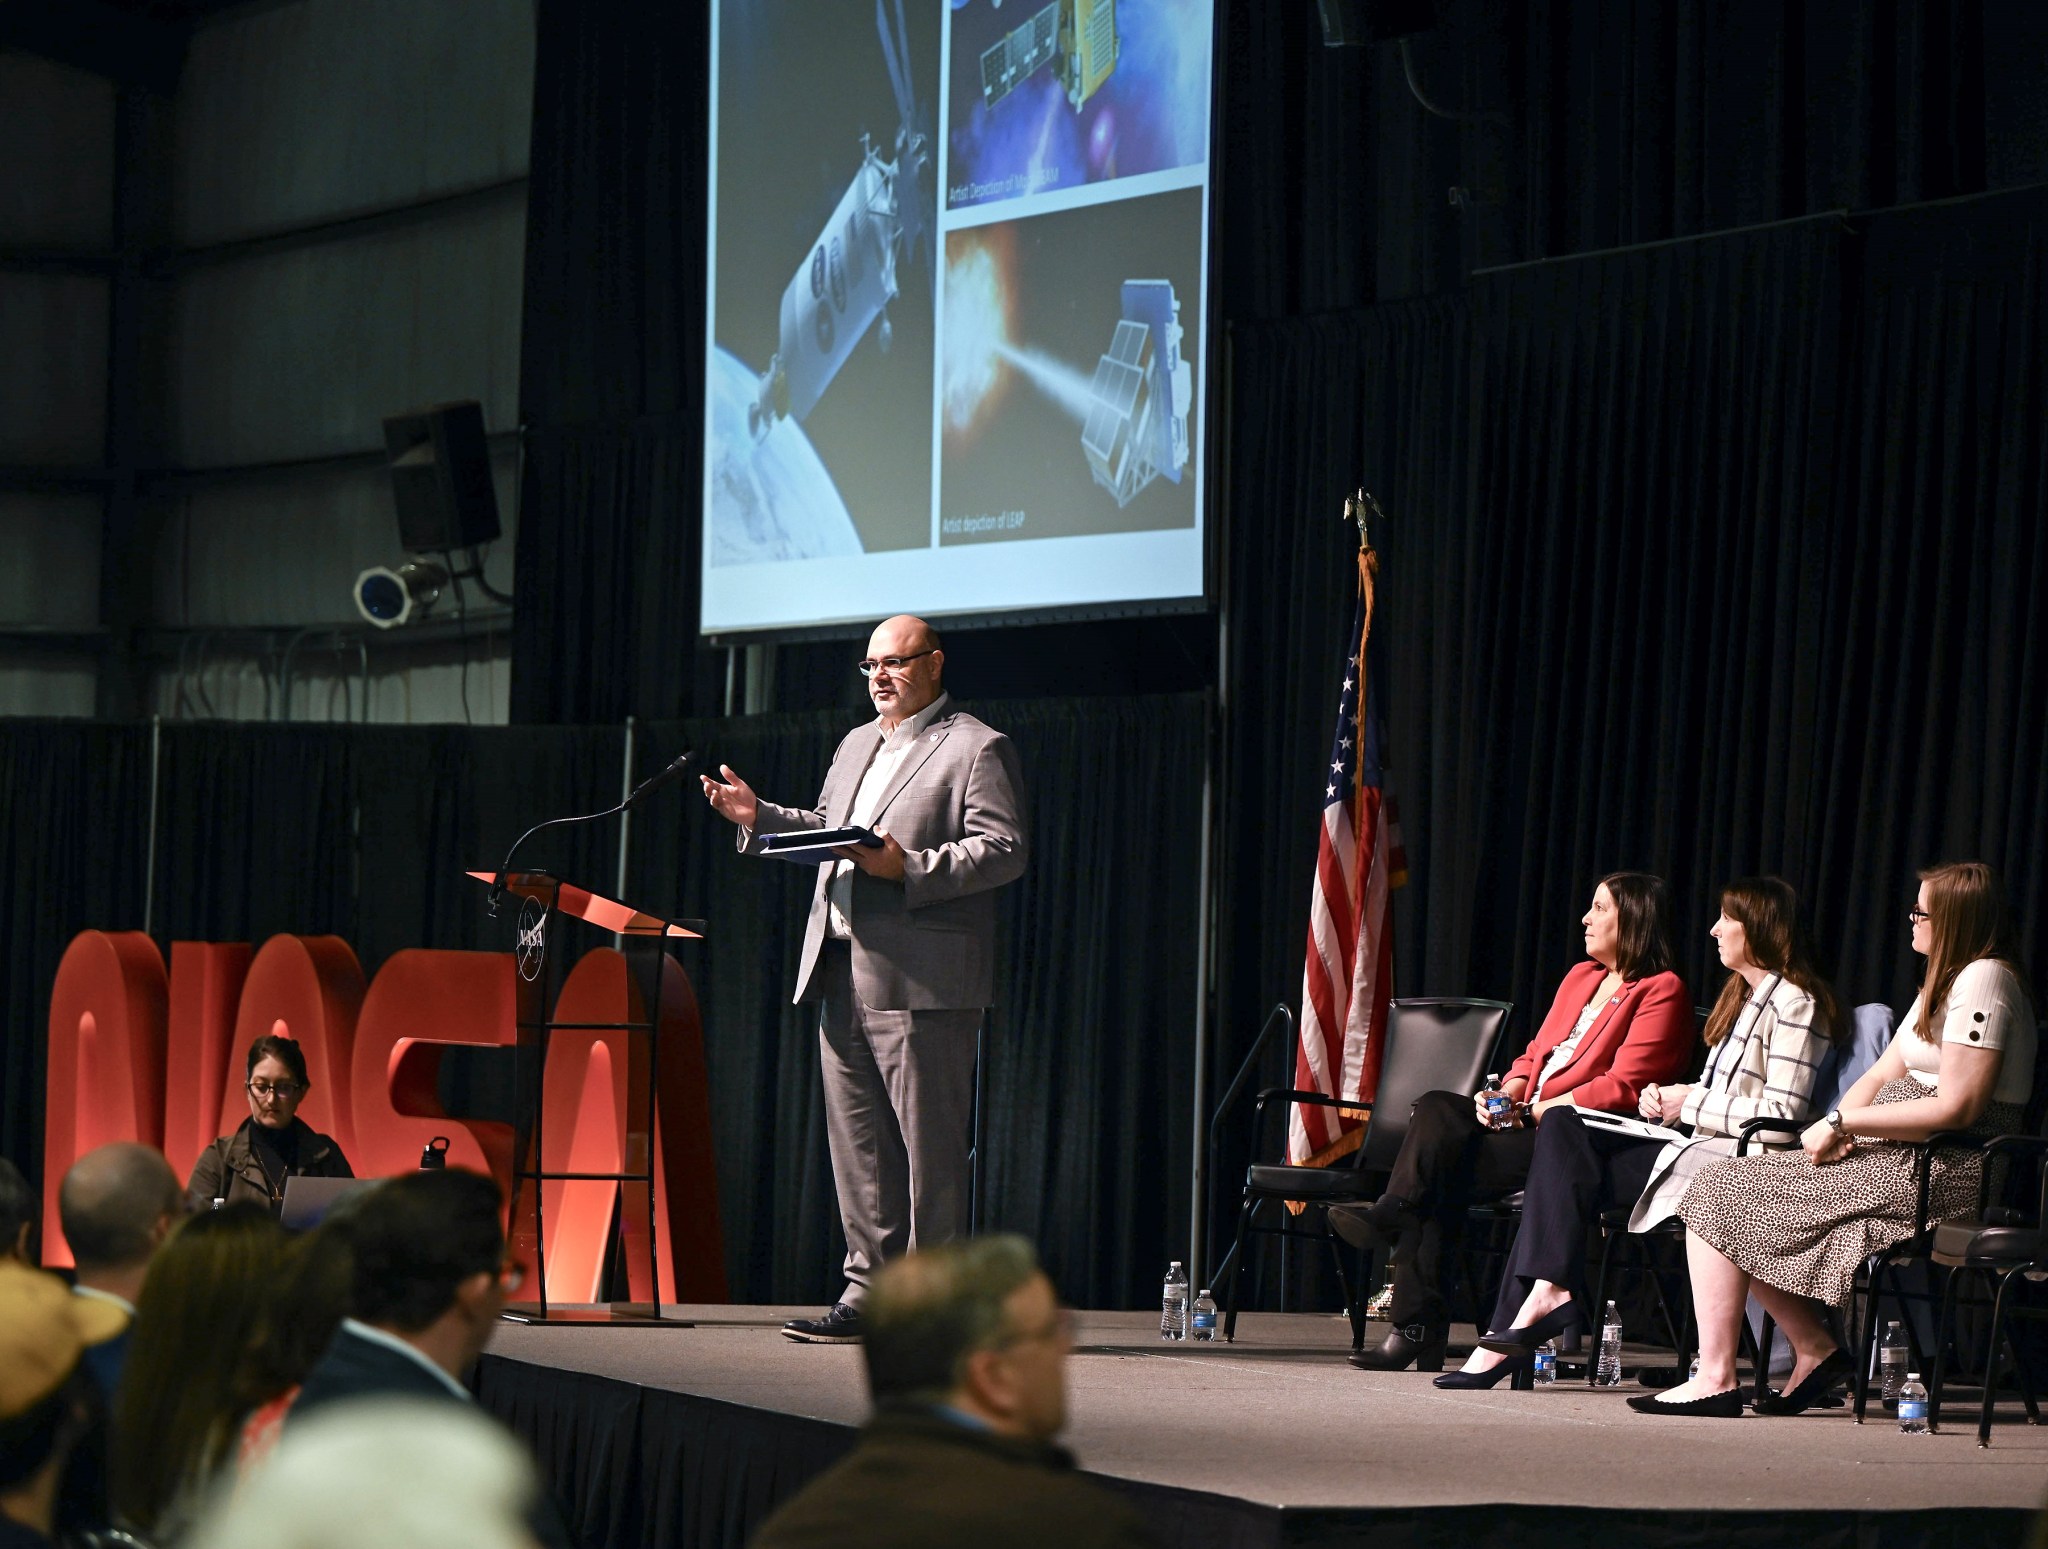 NASA Marshall Space Flight Center Director Joseph Pelfrey, standing, discusses the direction of Marshall and the center’s upcoming projects and strategies during the first all-hands meeting of 2024. Joining him on stage, from left, are Tia Ferguson, Marshall’s Space Systems Department director in the Engineering Directorate, Associate Center Director Rae Ann Meyer, and Mallory James, an aerospace engineer and management assistant in the office of the center director.